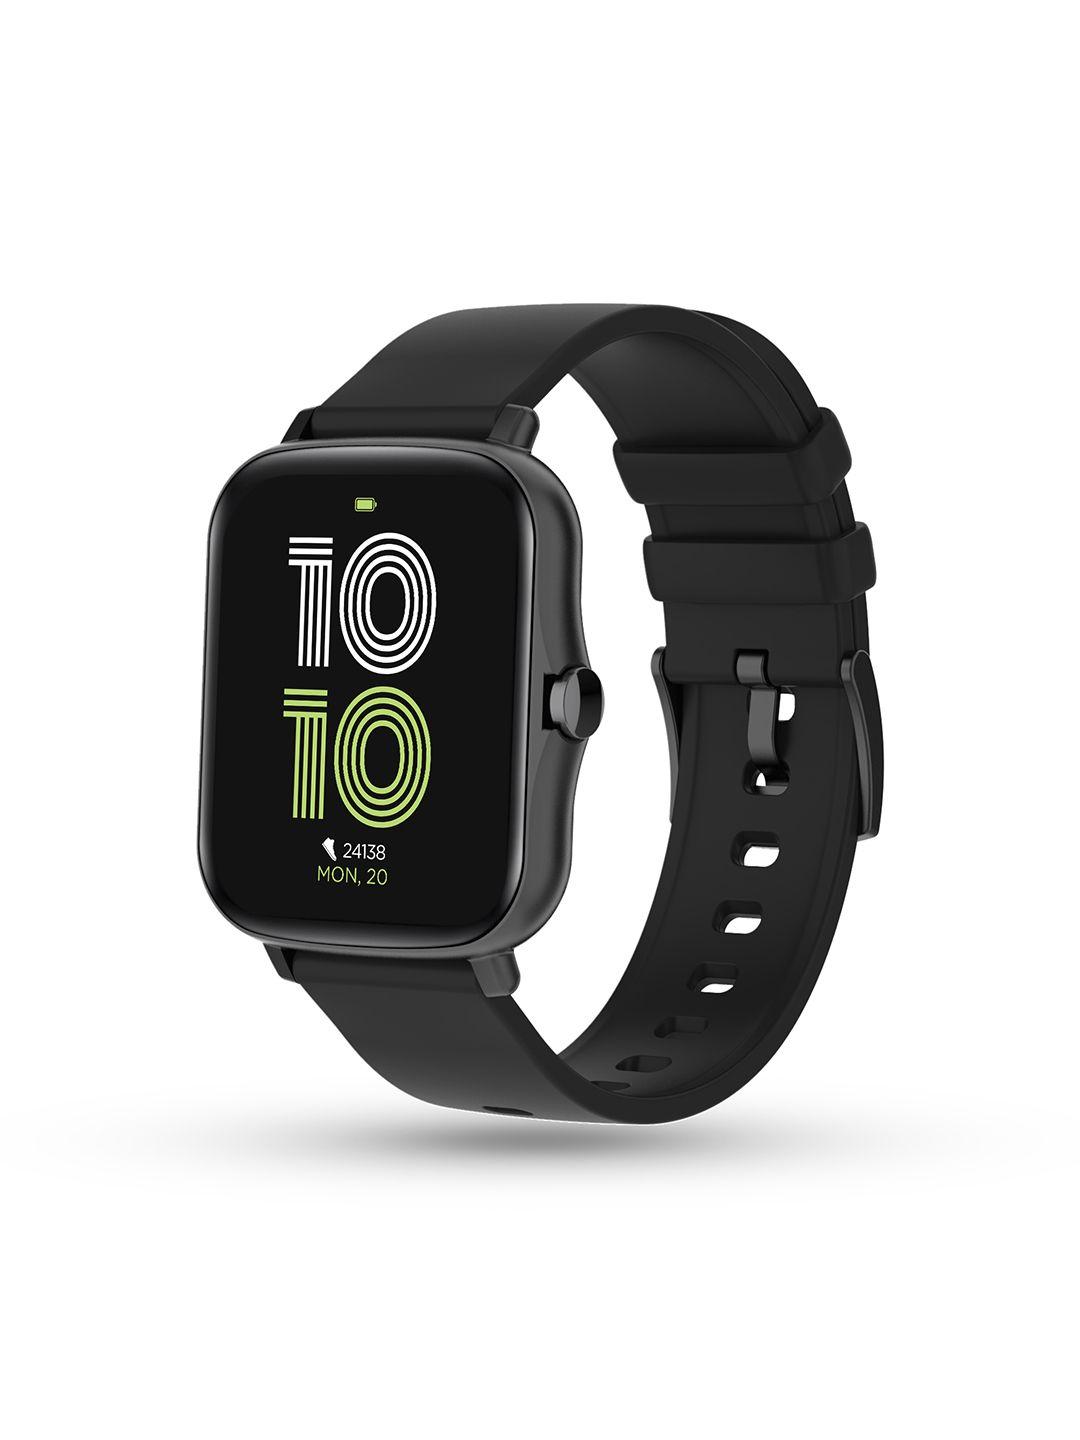 pebble Jet Black Spark 1.7 inch BT Calling with SPO2, HR Monitor Smartwatch